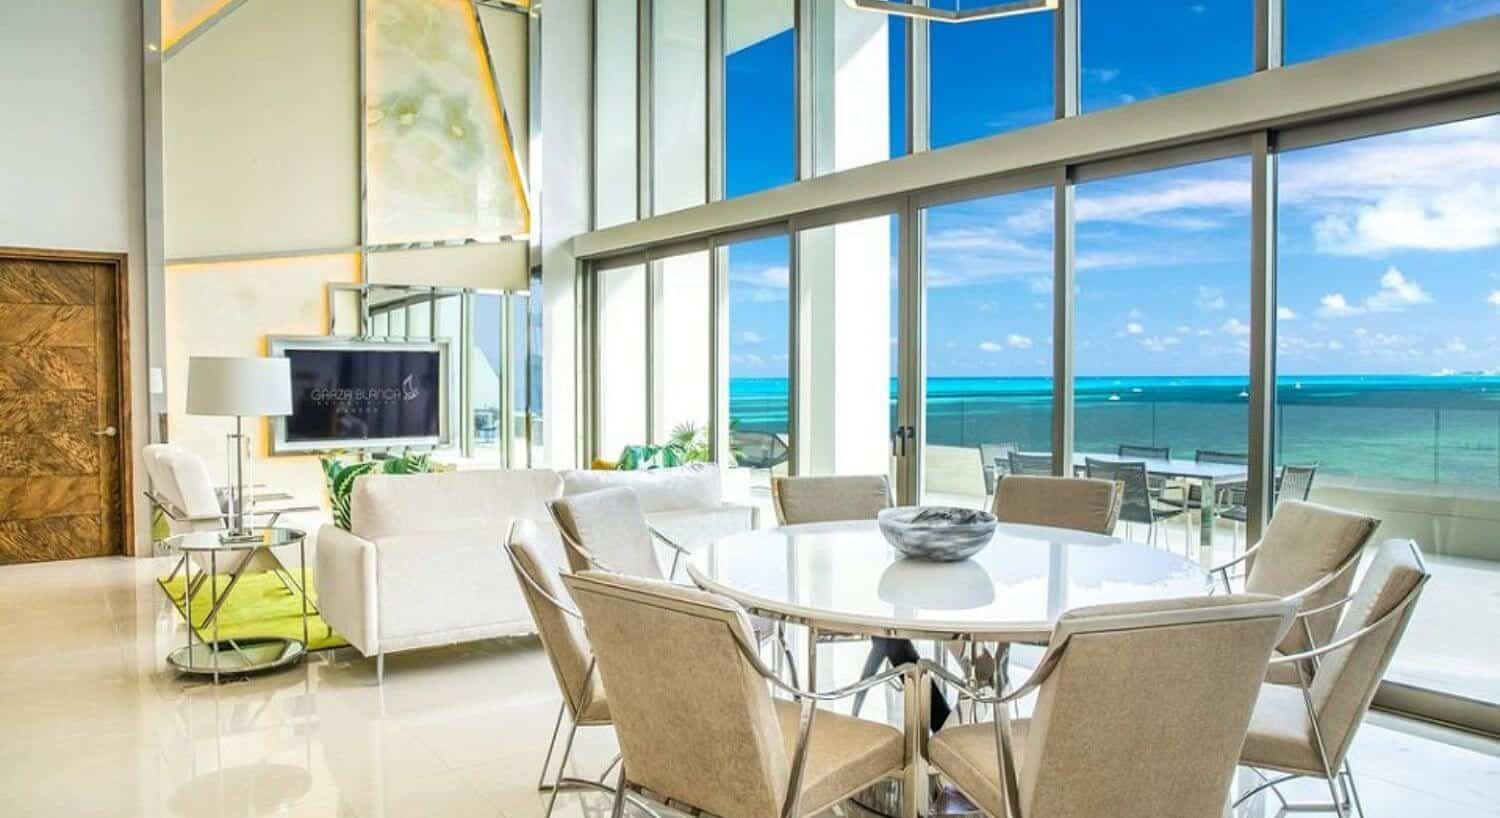 A large living and dining area with white sofa and chairs, flat screen TV, round dining table and plush tan chairs, and two story floor to ceiling windows, and sliding doors leading out to a private balcony with outdoor patio furniture, with stunning turquoise ocean views.